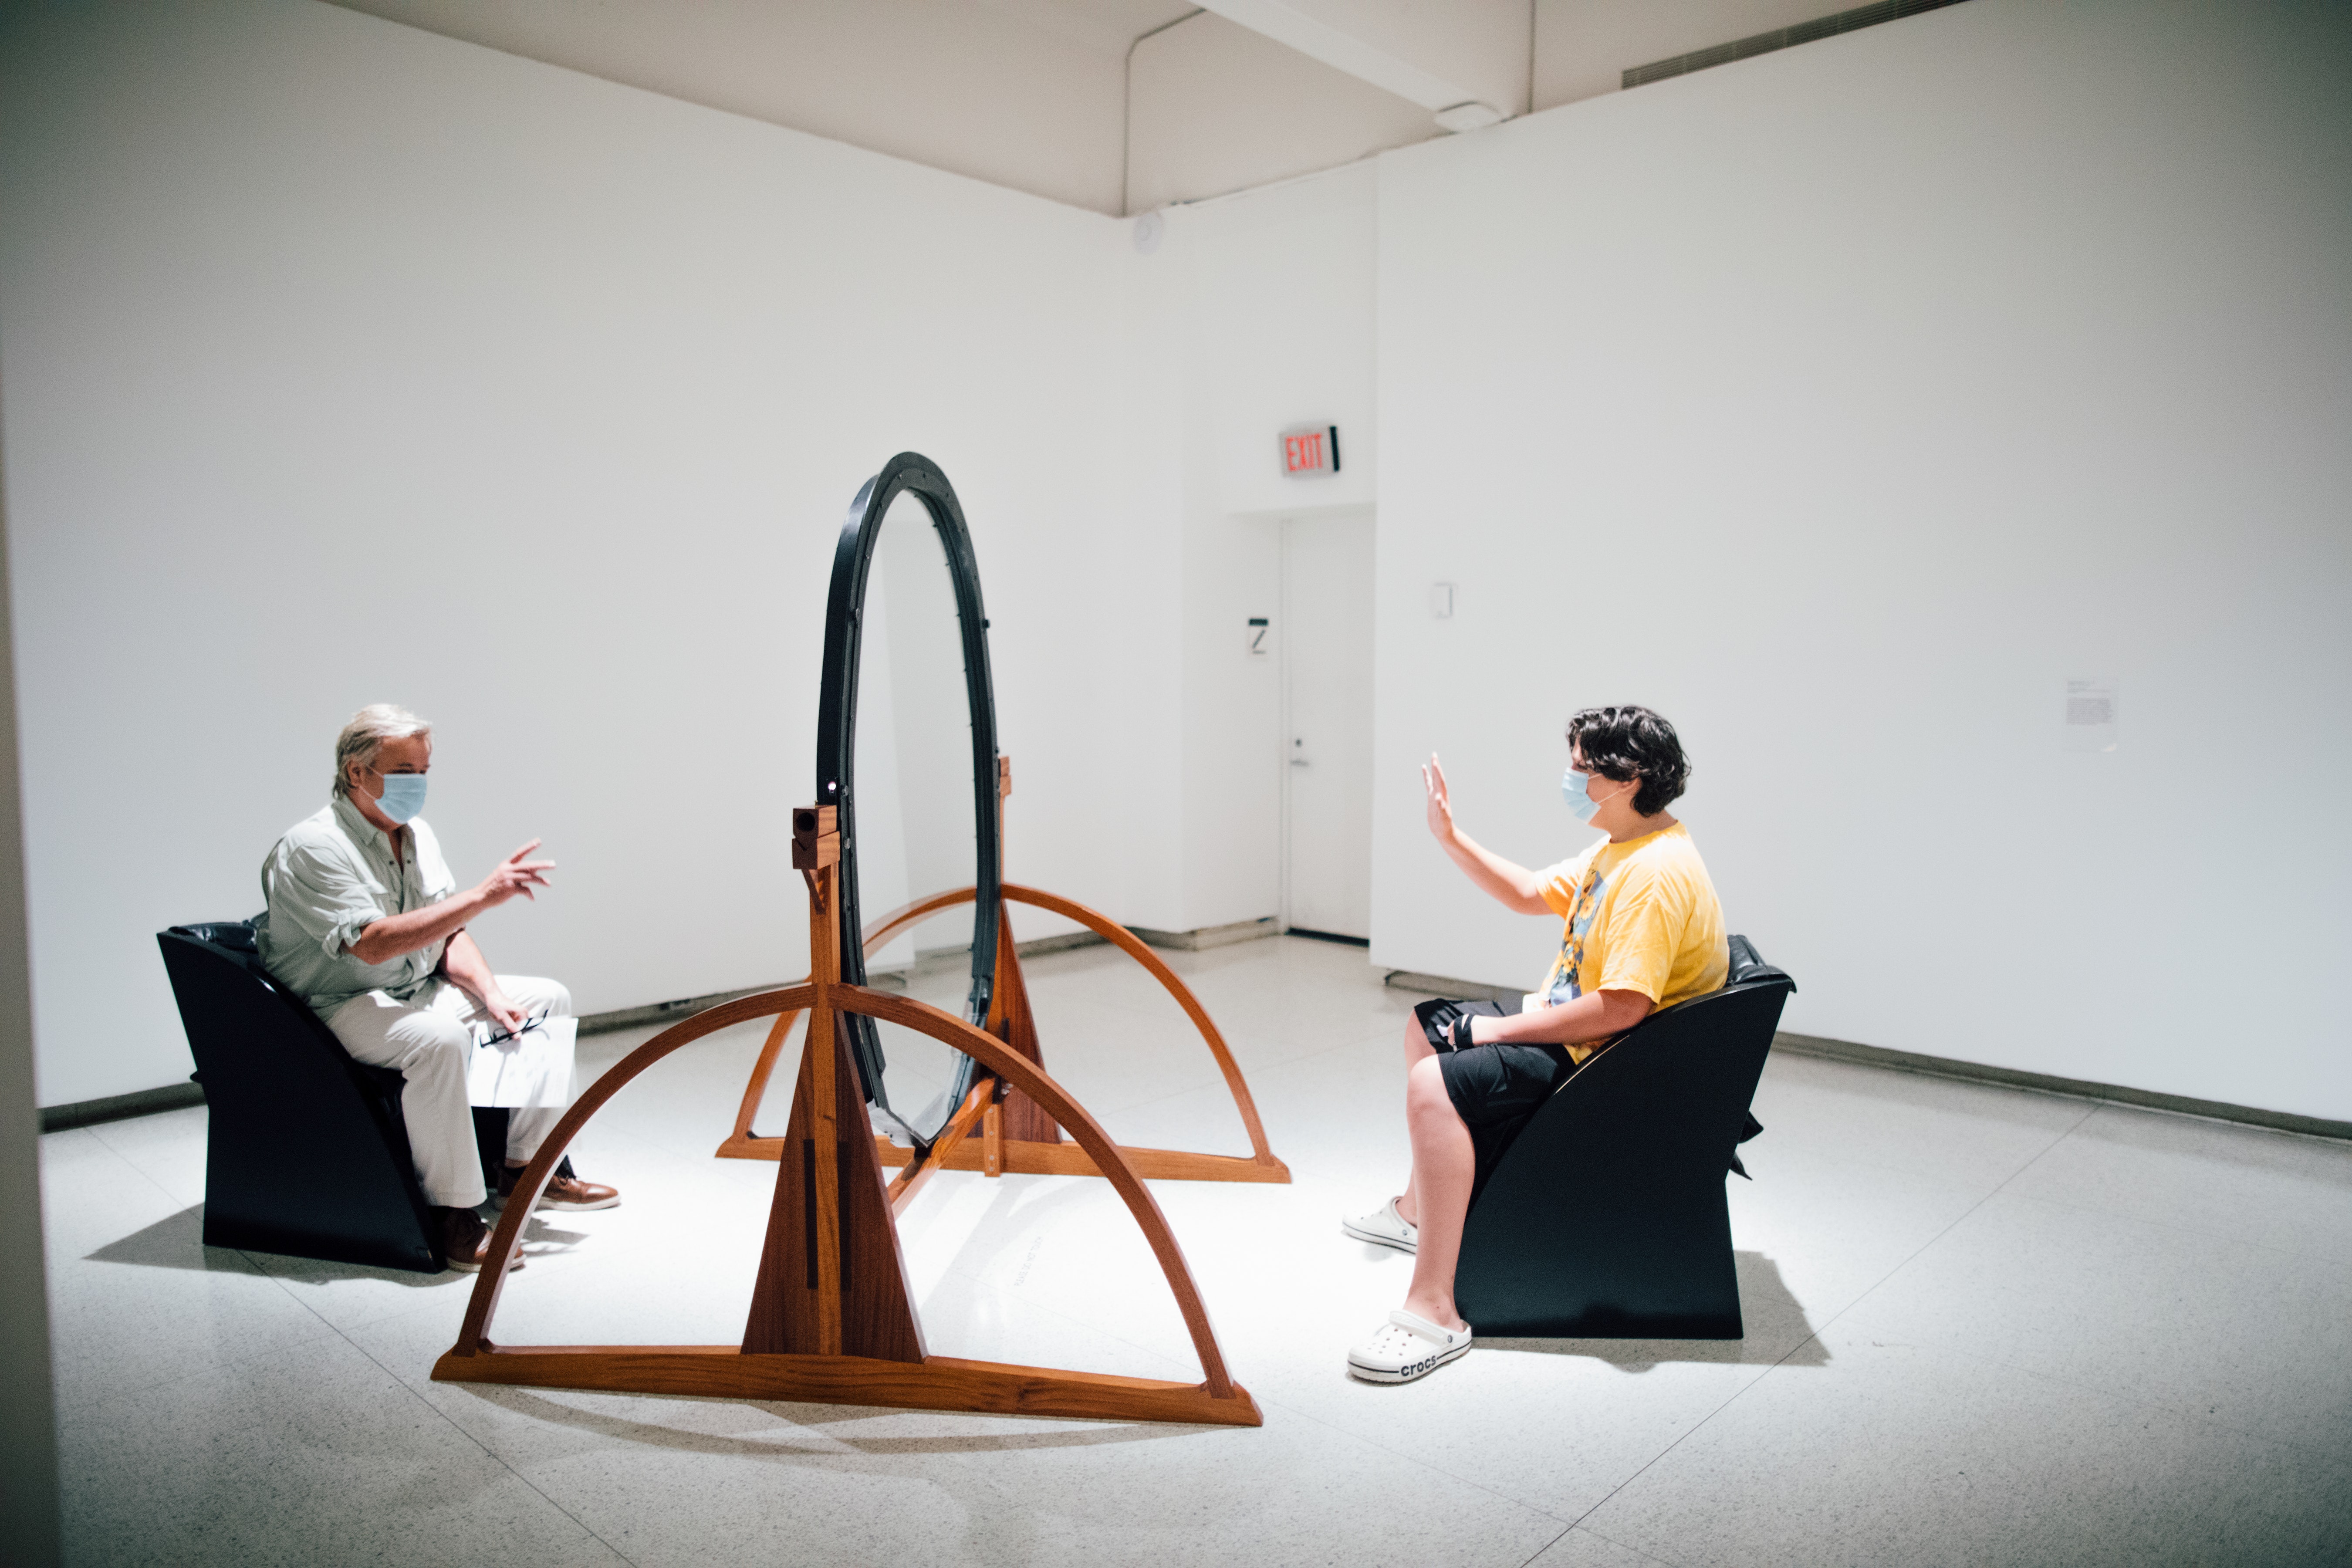 Two people sit in a sculpture consisting of chairs facing each other with glass in between.